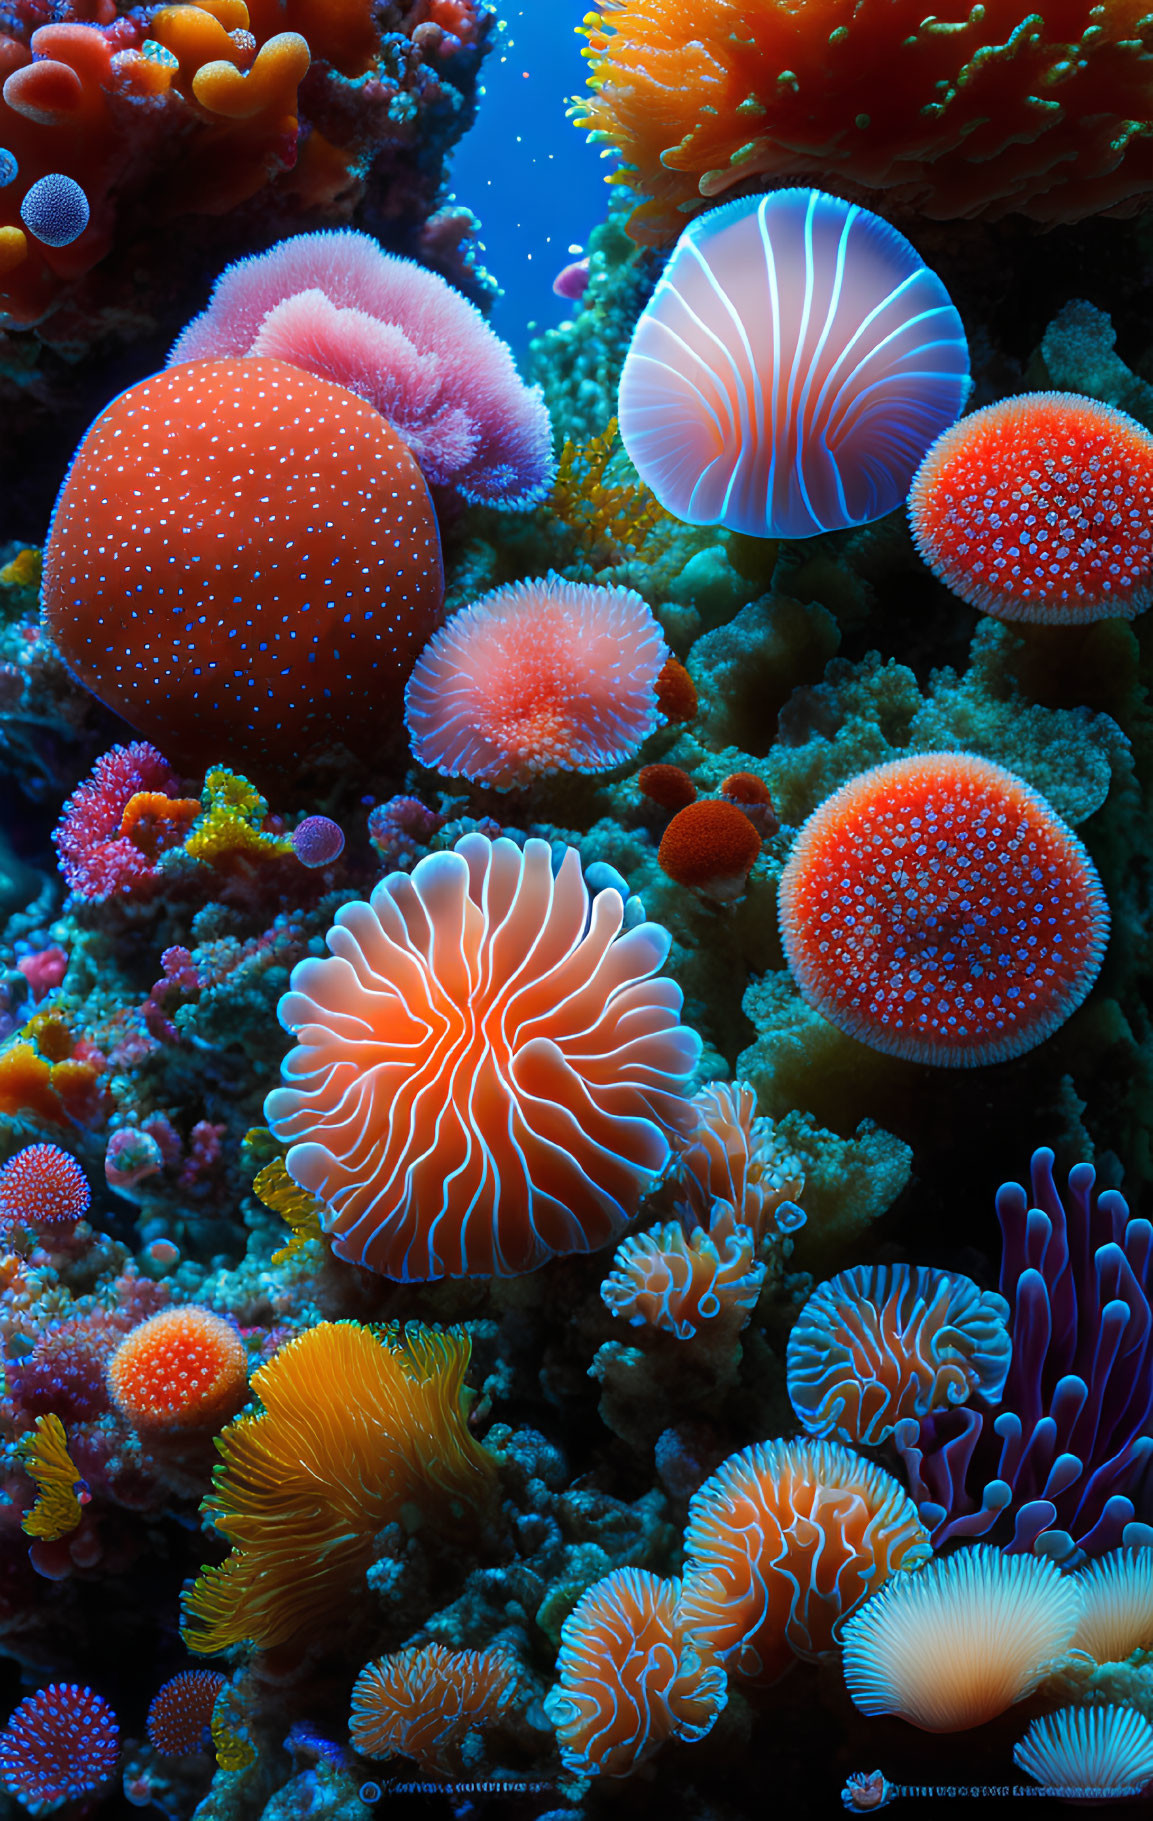 Colorful Coral Species and Anemones in Vibrant Underwater Scene